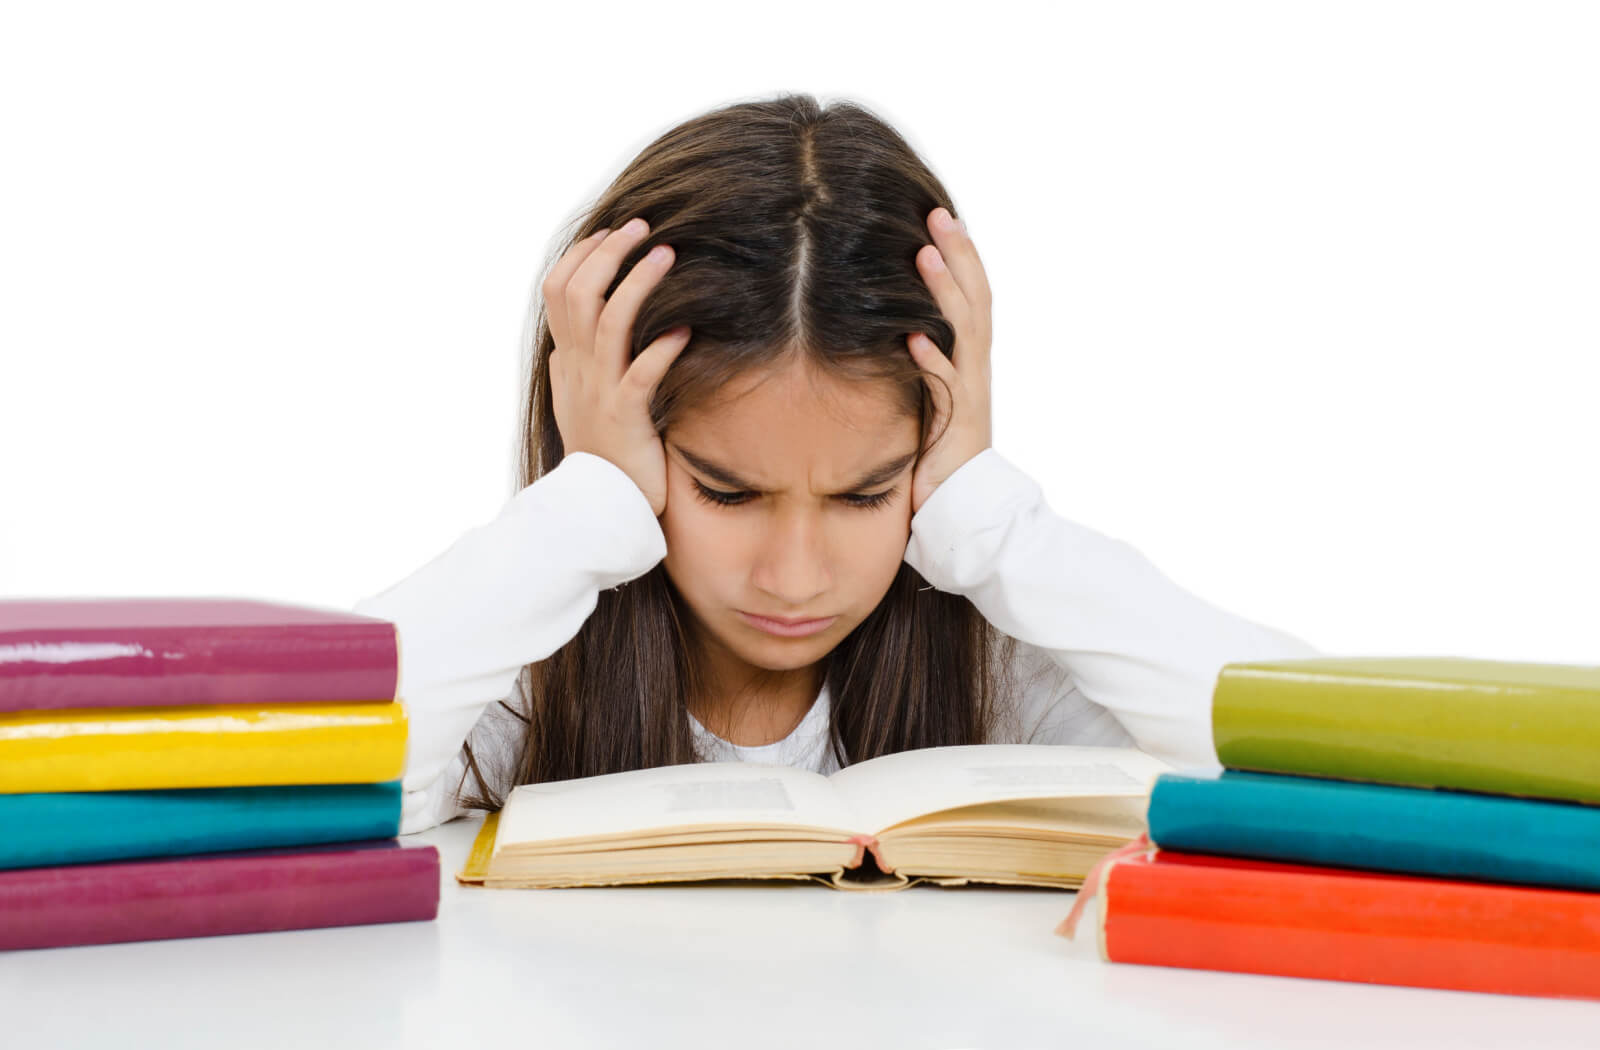 A young girl looking frustrated while reading with her hands on her head